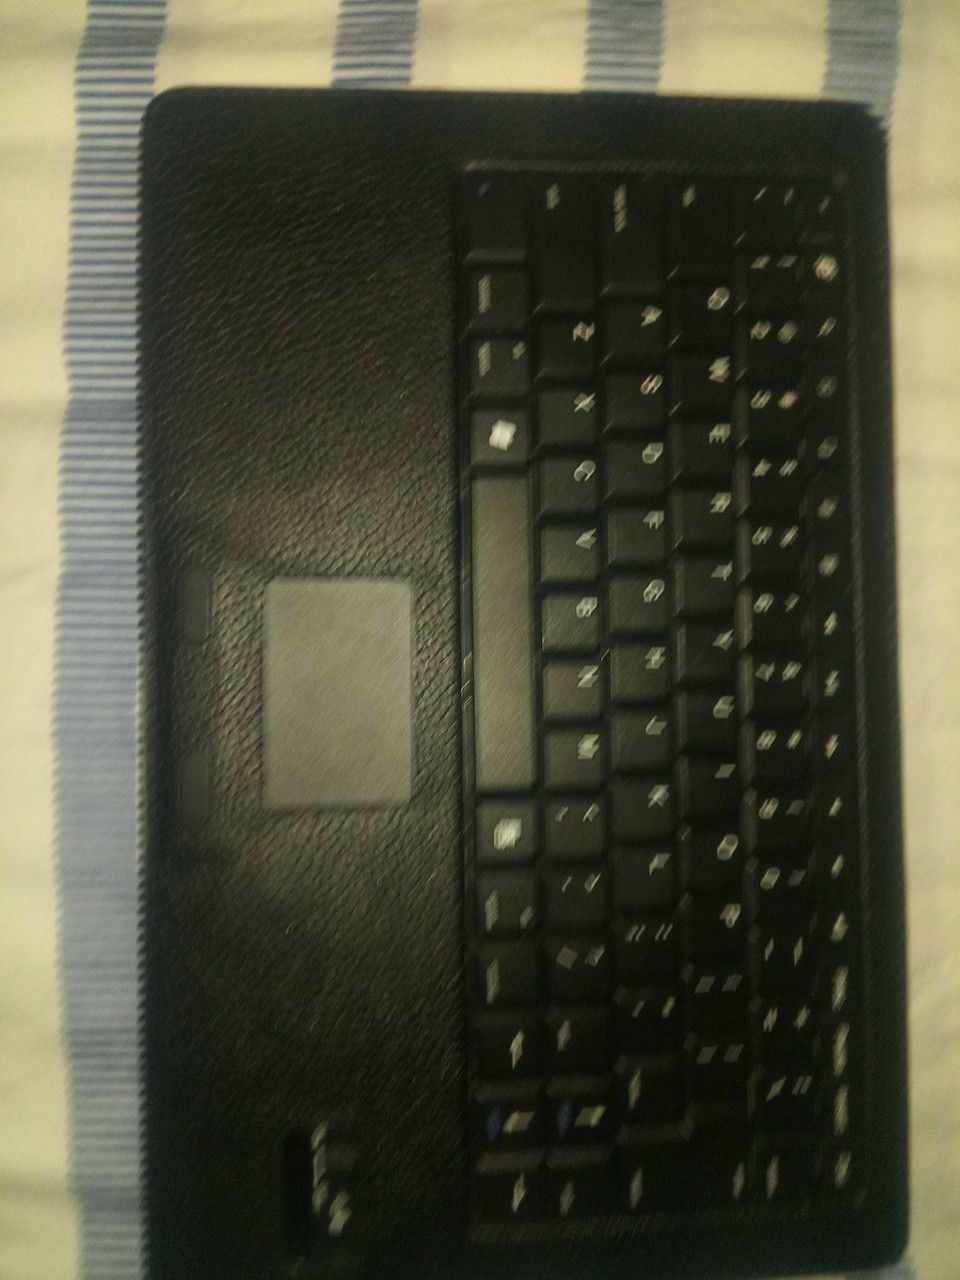 Bluetooth Keyboard mouse pad. And case